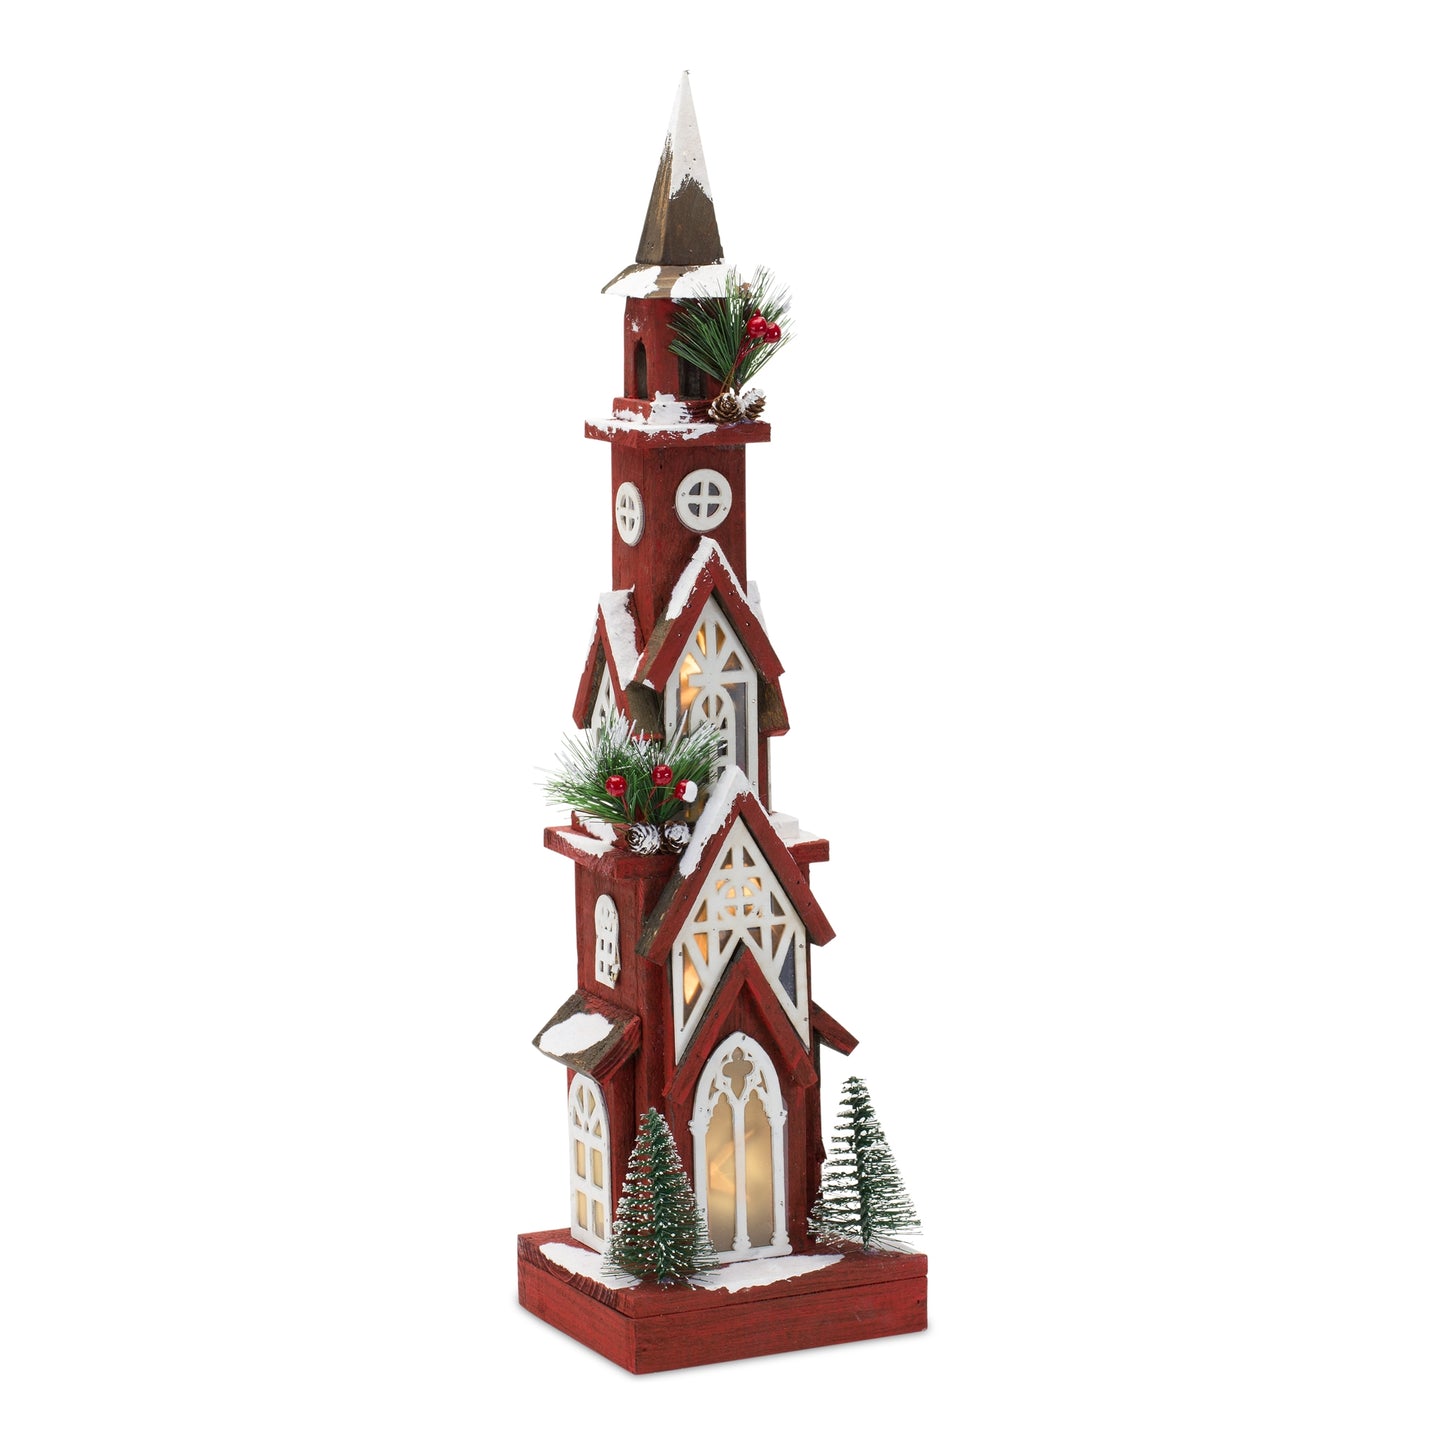 Lighted Winter Church Display with Pine Accents and Snowy Finish 19"H